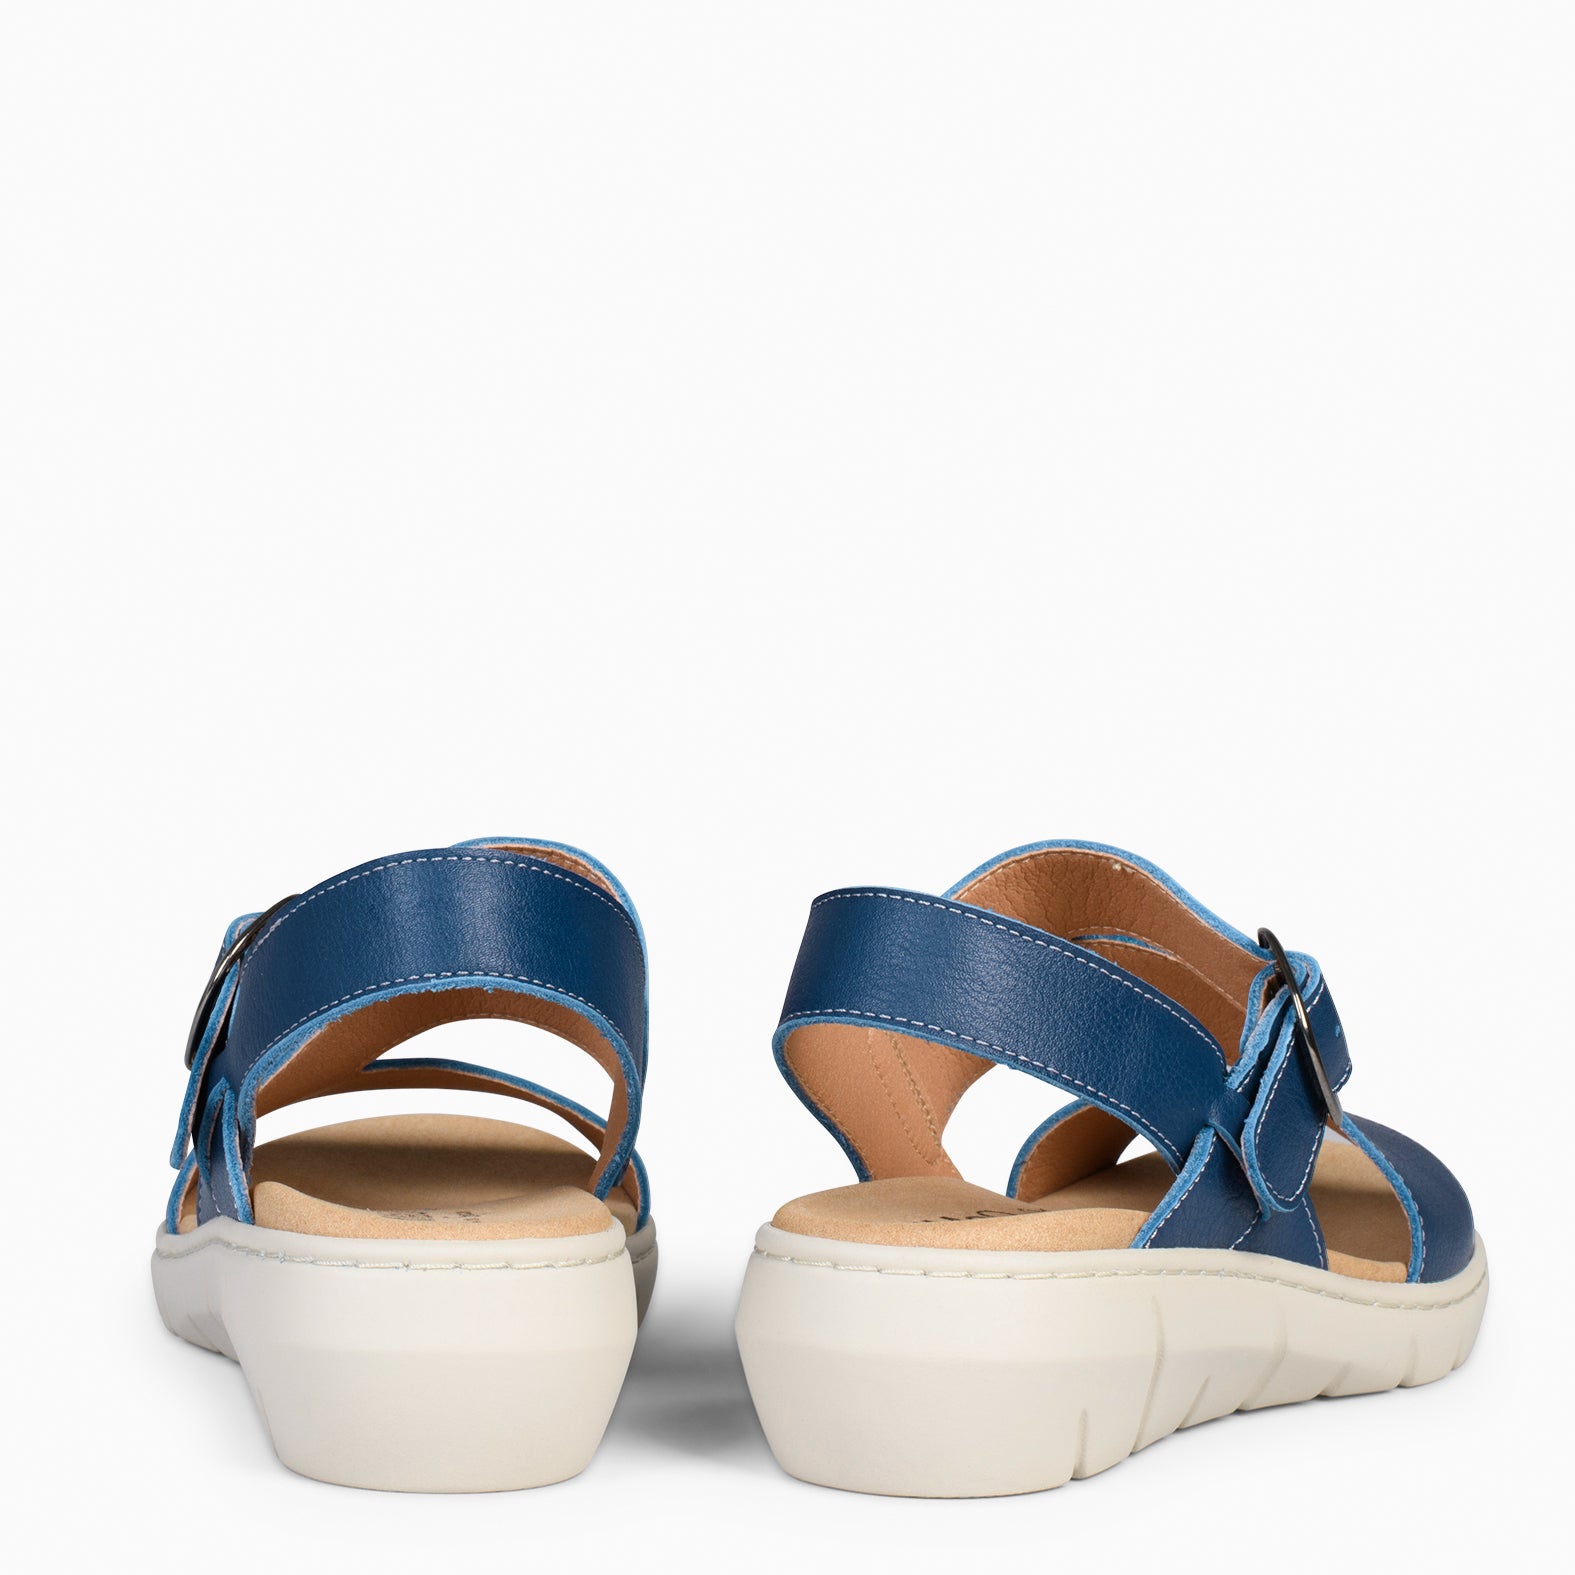 NATURA – BLUE sandals with removable insole